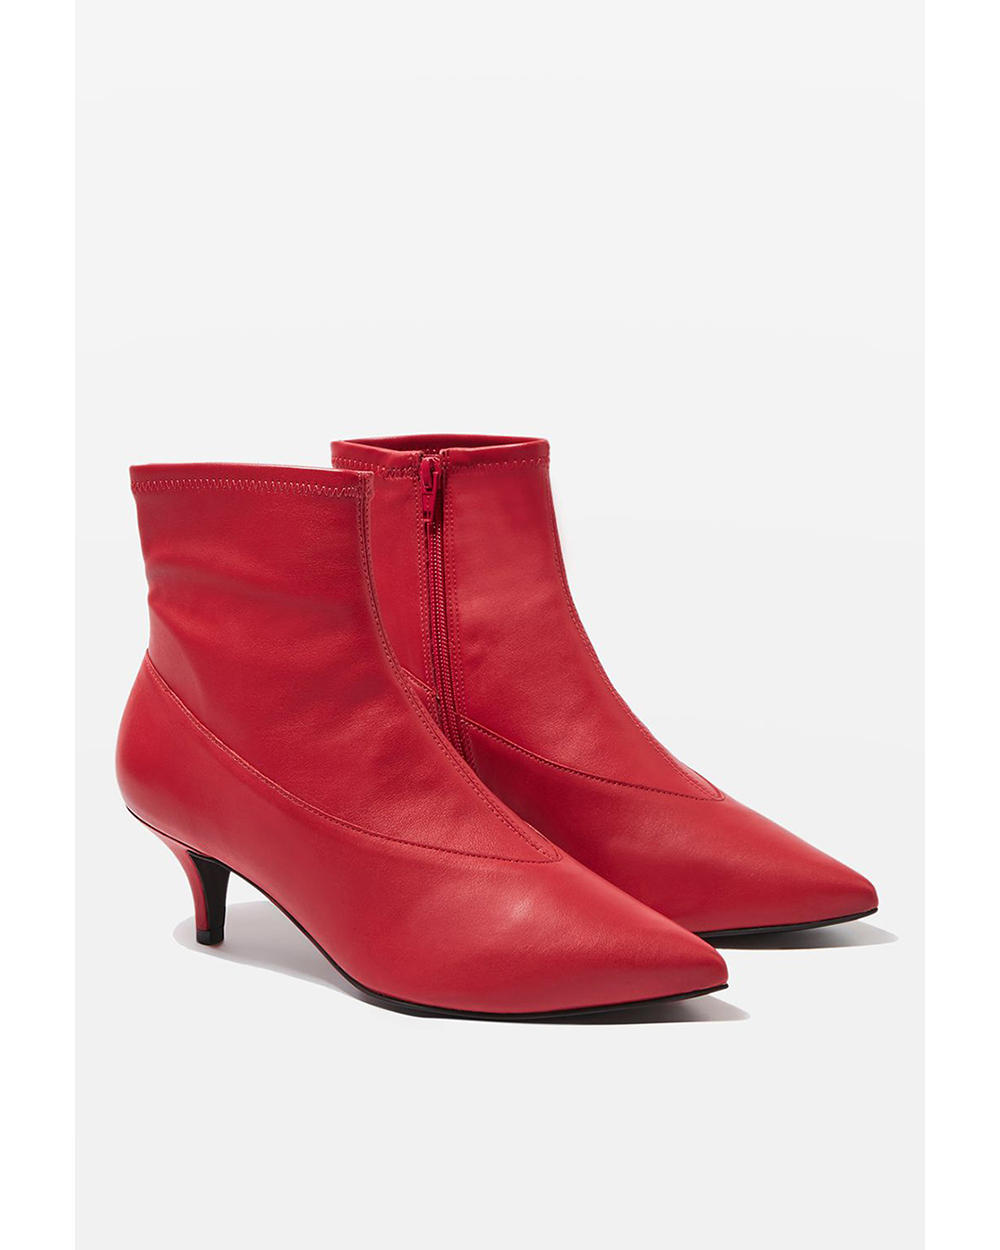 THE RED LEATHER: Topshop, $148